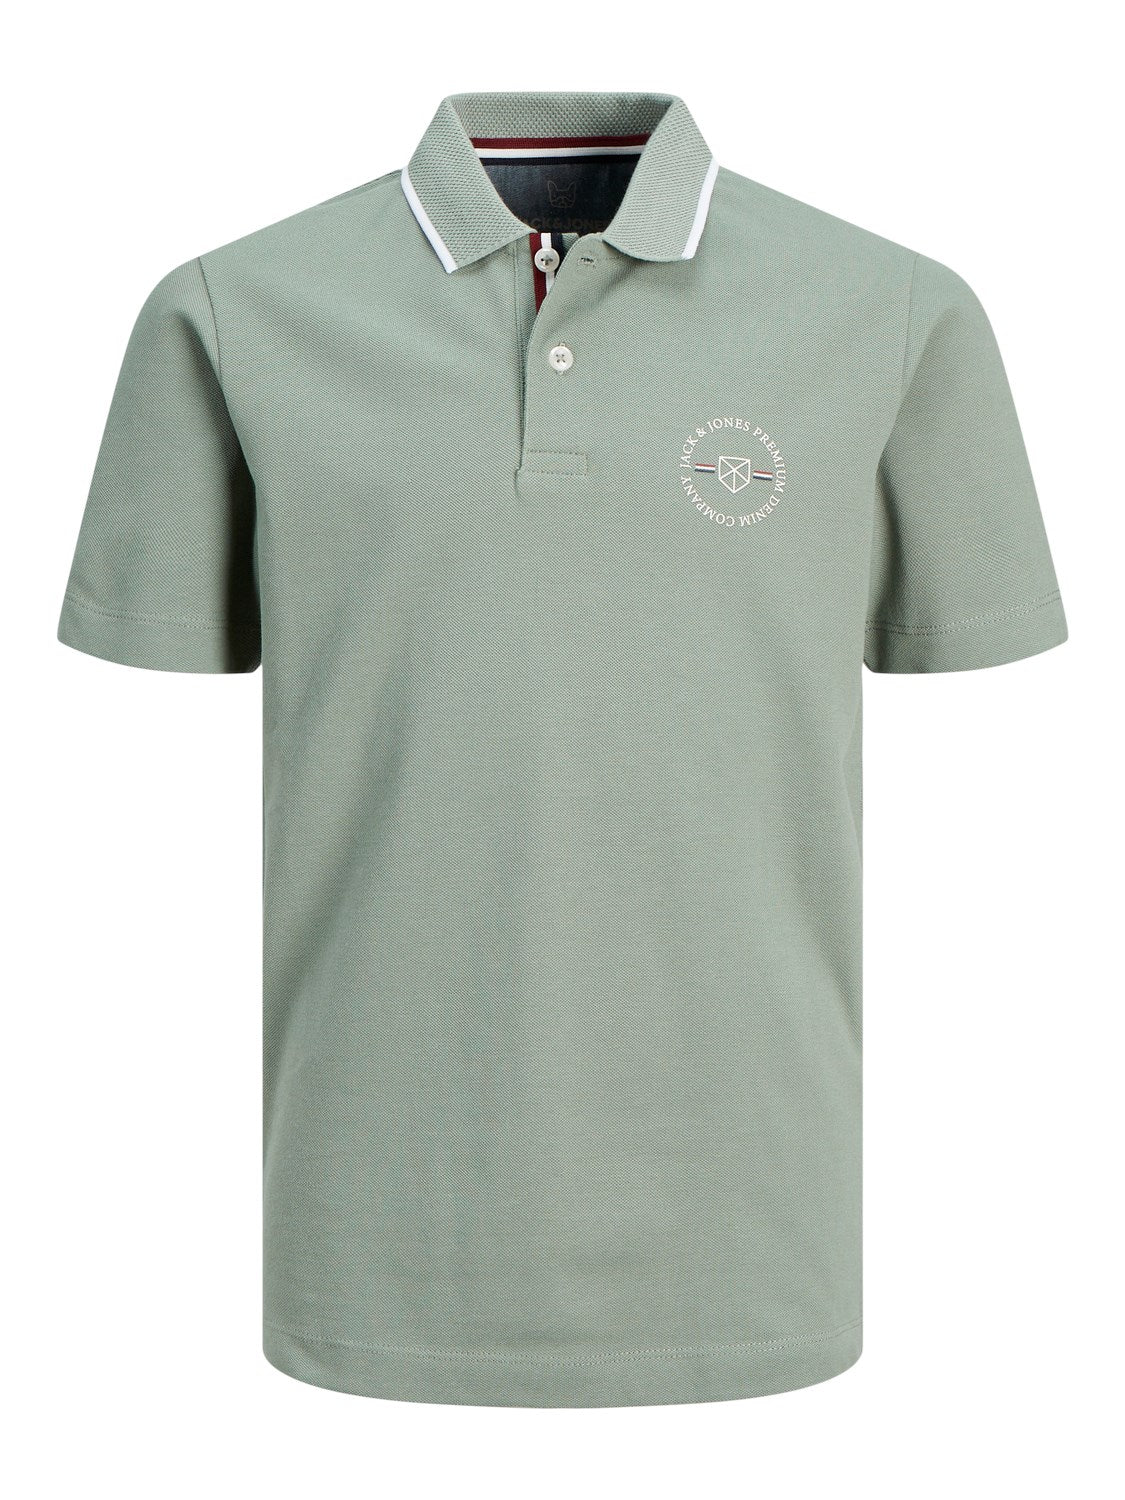 Shield Junior Boy Lily Pad Polo Shirt-Front view